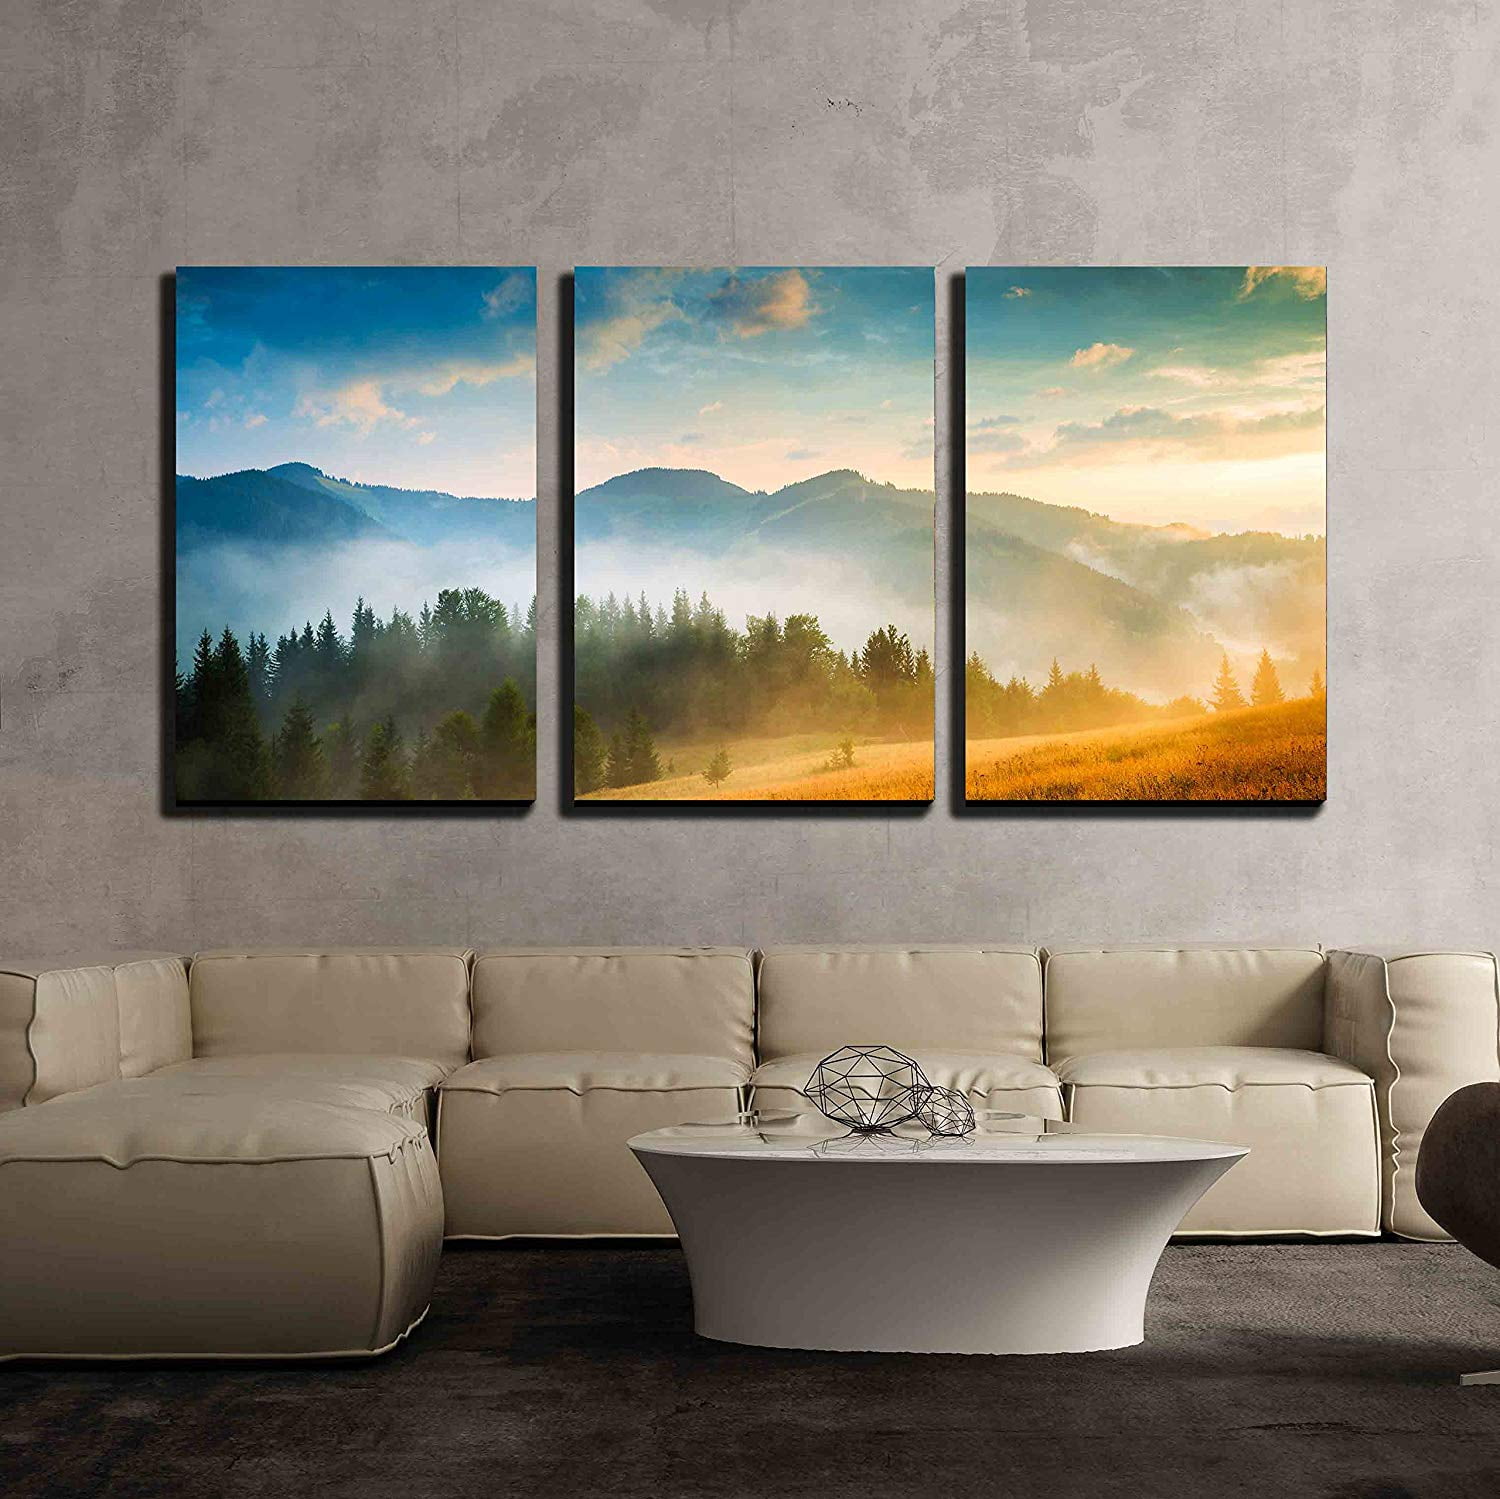 wall26 - 3 Piece Canvas Wall Art - Amazing Mountain Landscape with Fog